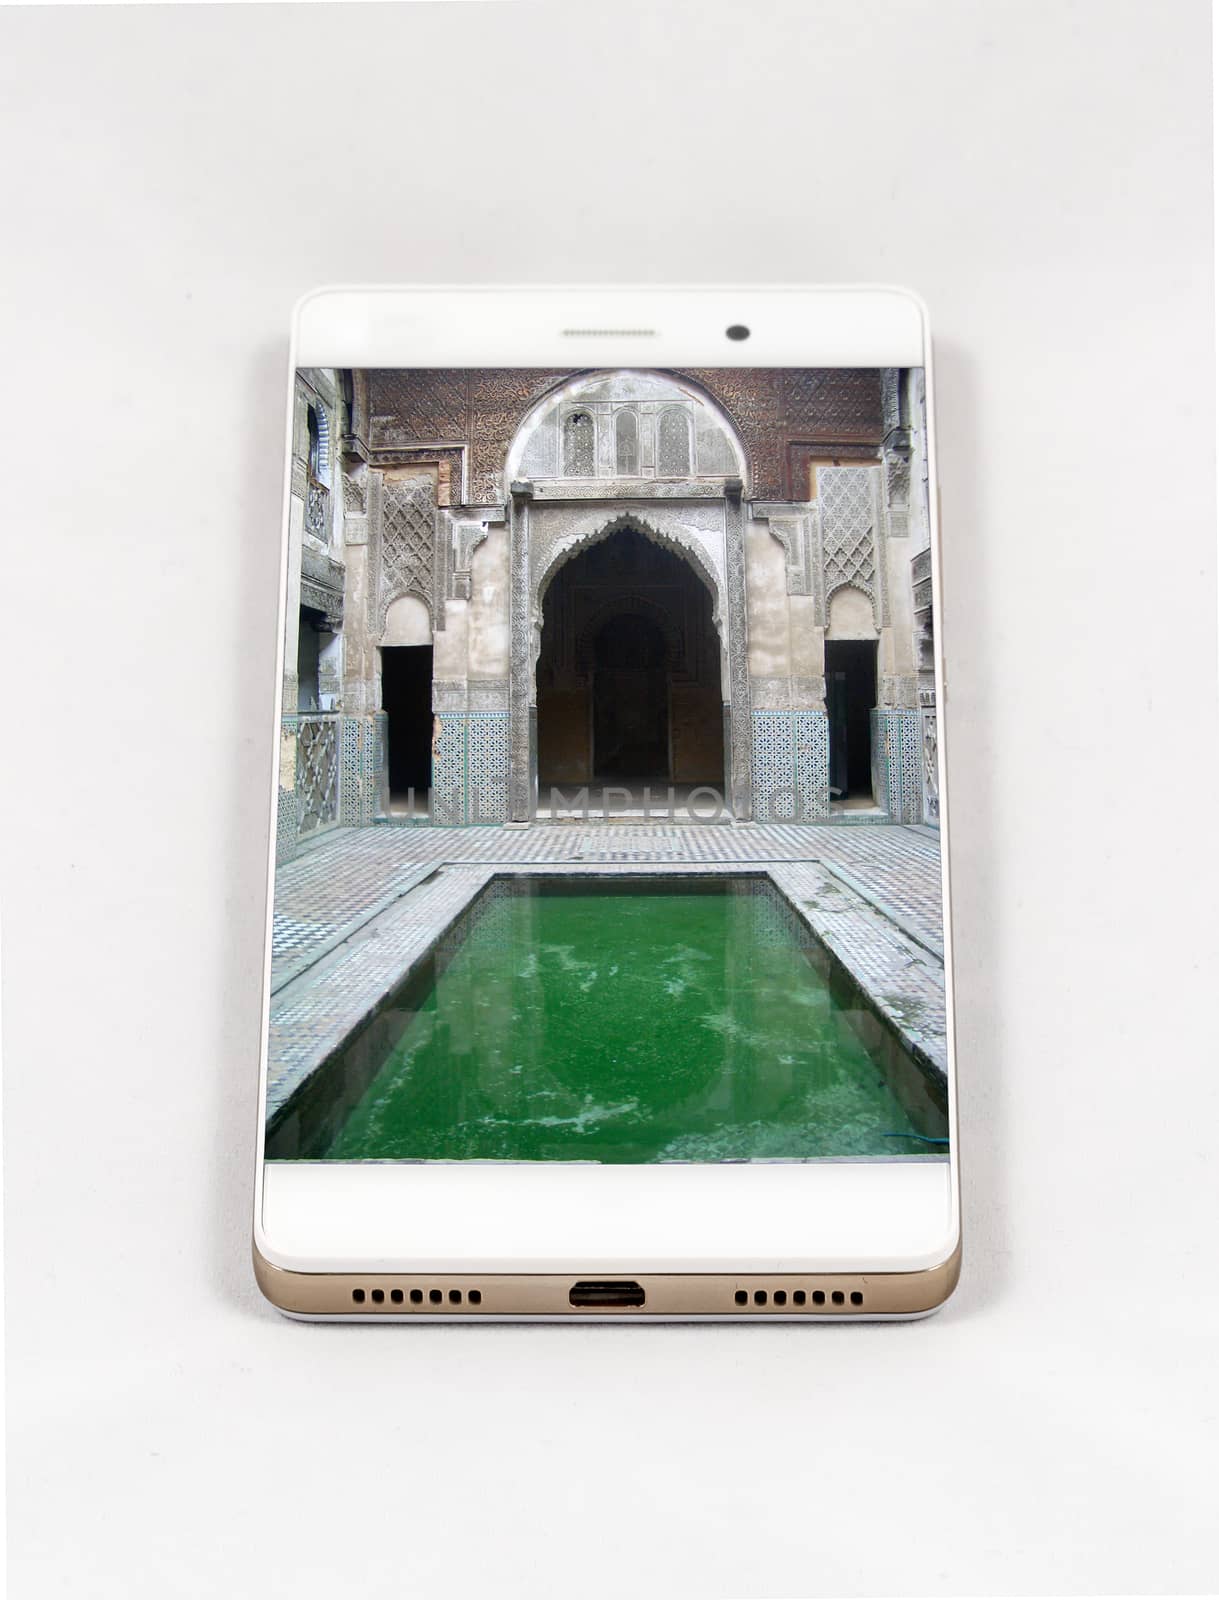 Modern smartphone with full screen picture of an ancient Medersa in Fez, Morocco. Concept for travel smartphone photography. All images in this composition are made by me and separately available on my portfolio